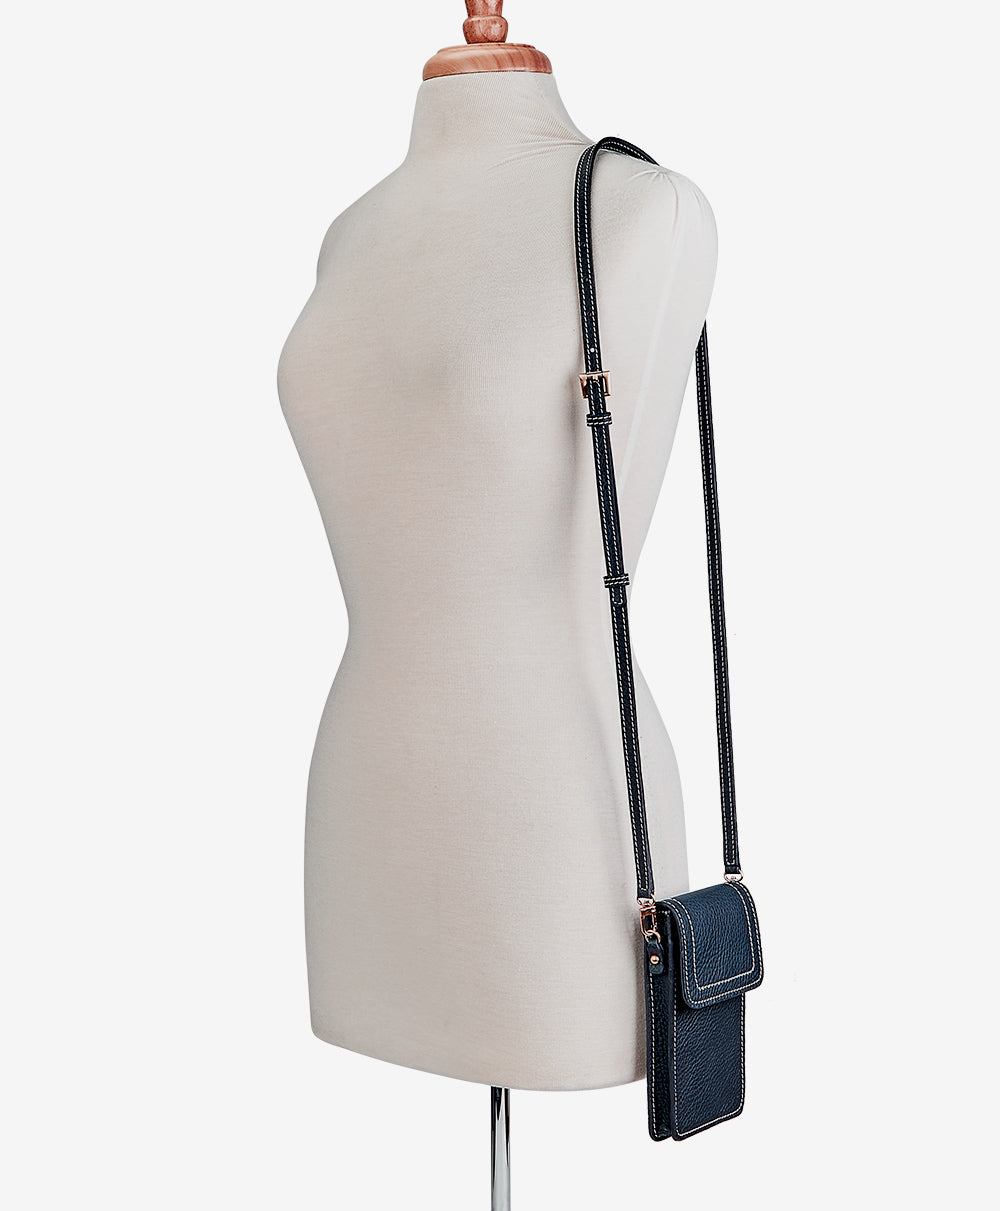 Women's Italian Pebbled Leather Phone Crossbody in Navy, Italian Leather by Quince